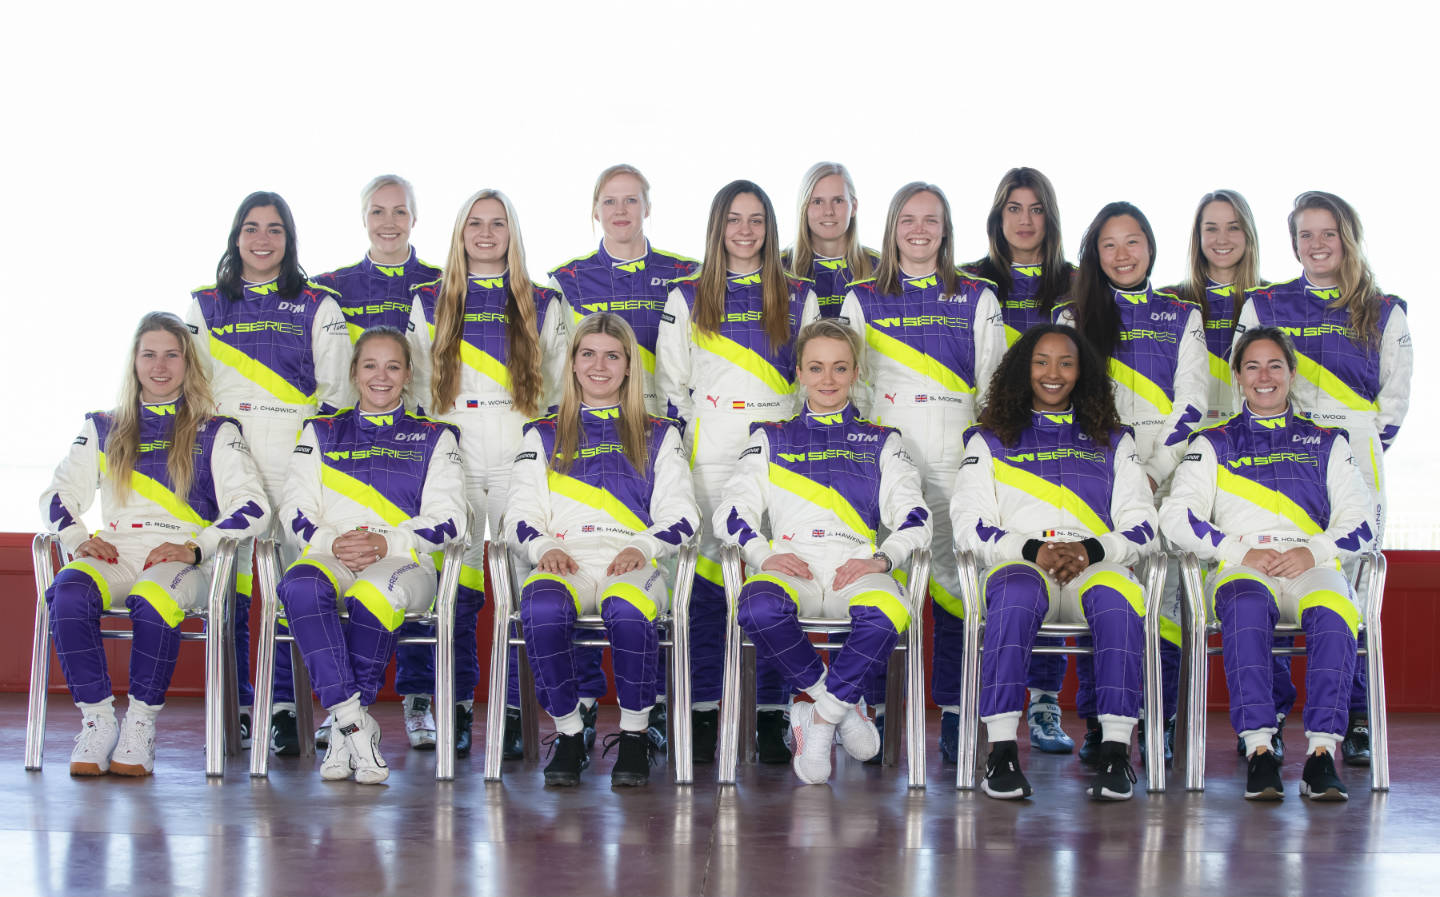 W Series reveals the full driver roster for its first female-only racing series